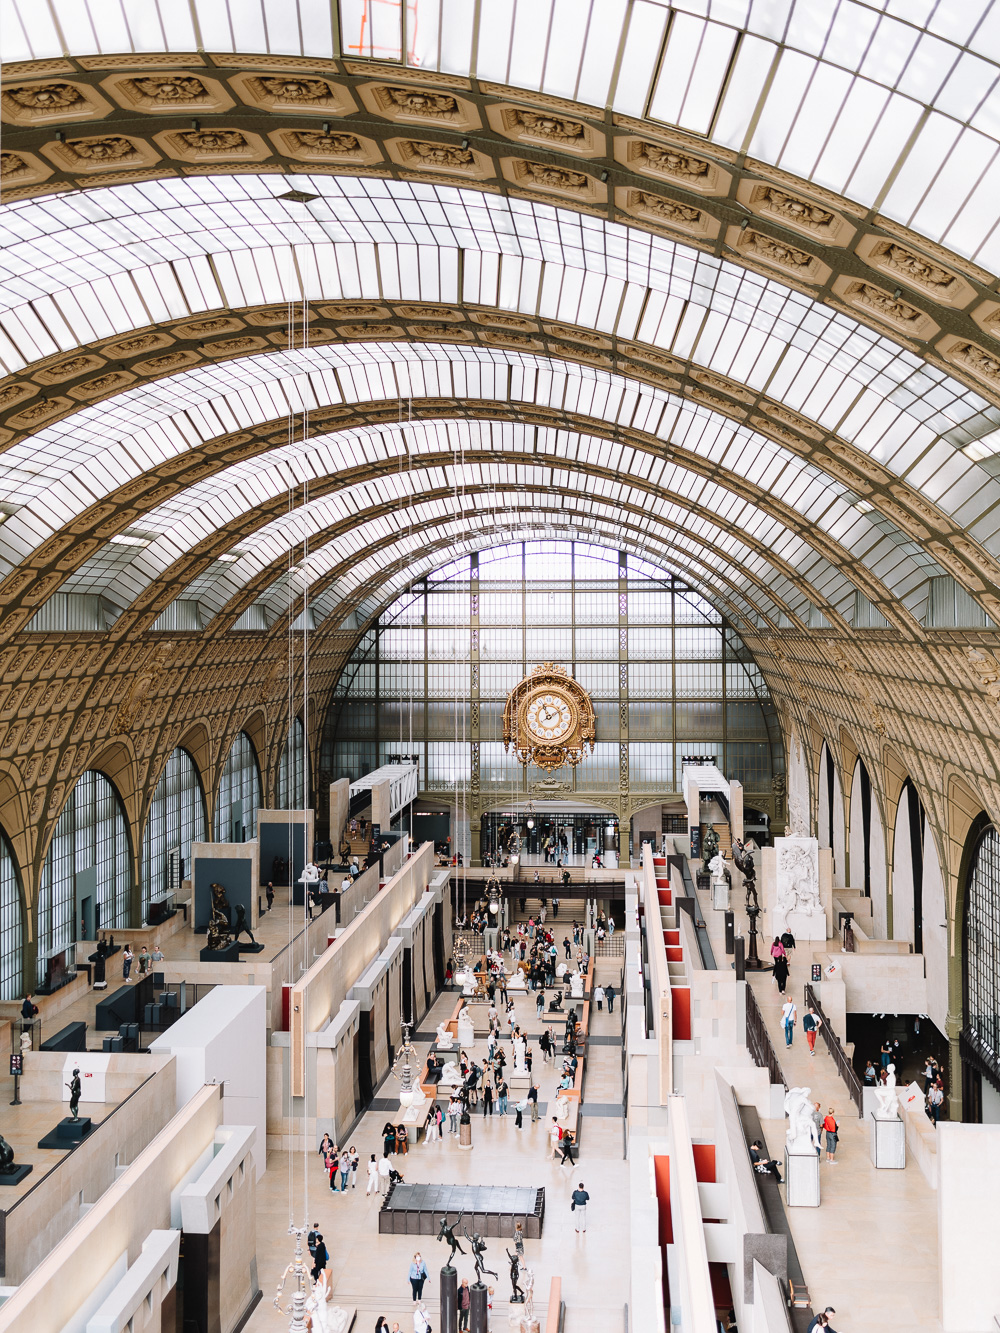 Buy your tickets for Musée d'Orsay online